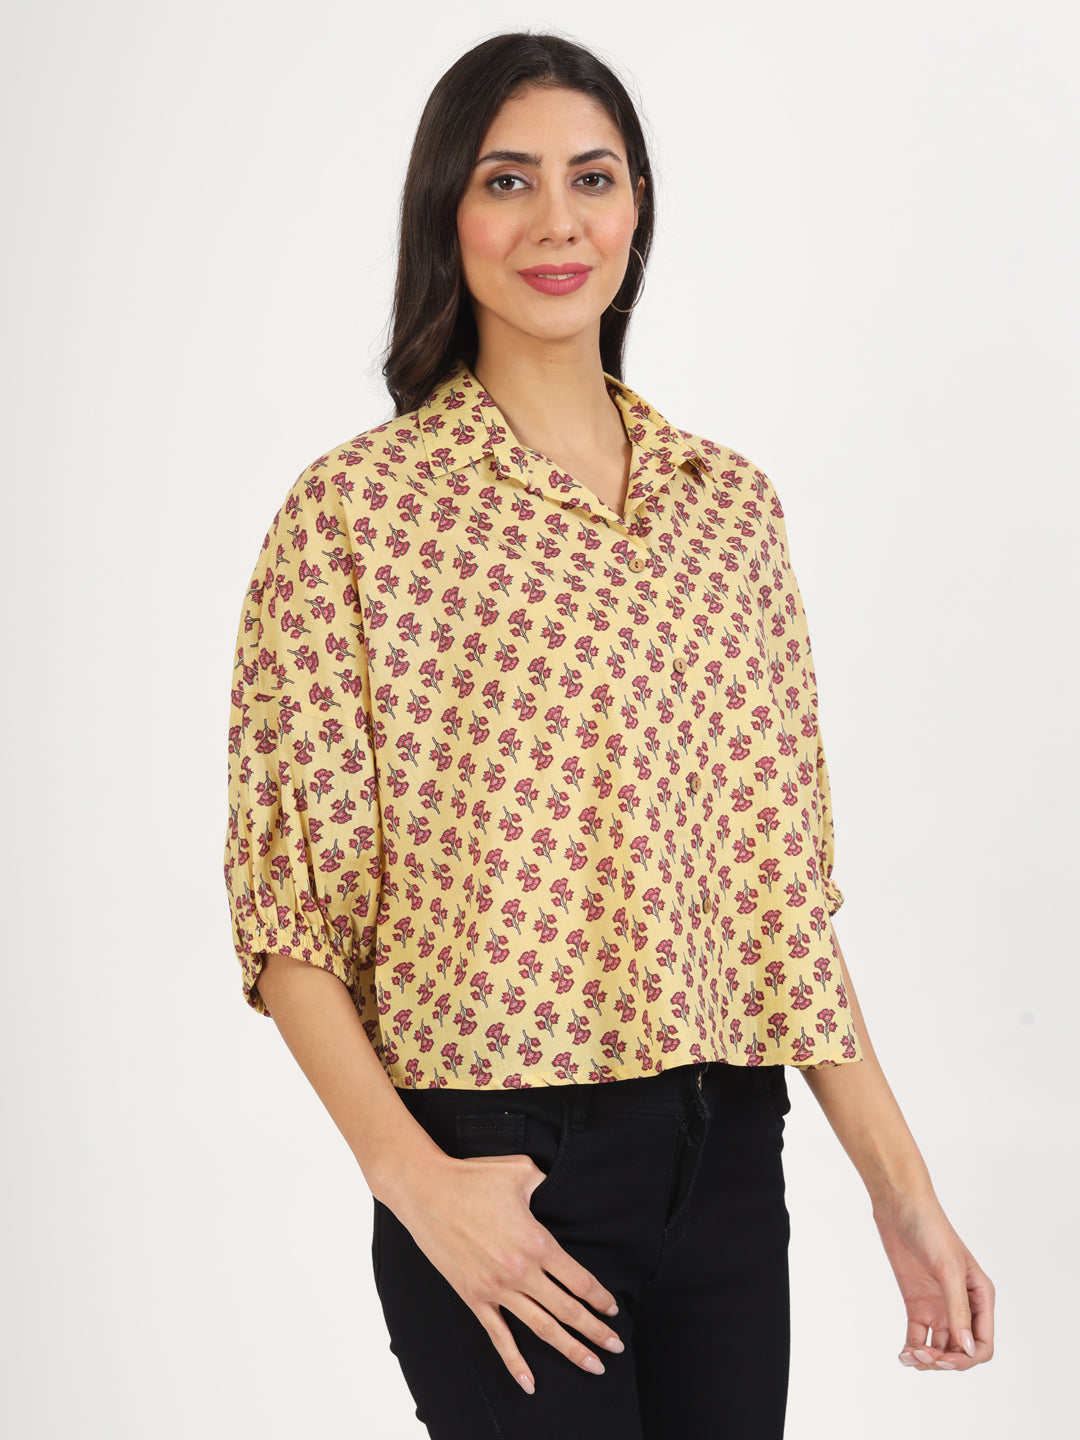 Beige Floral Printed Cotton Tops